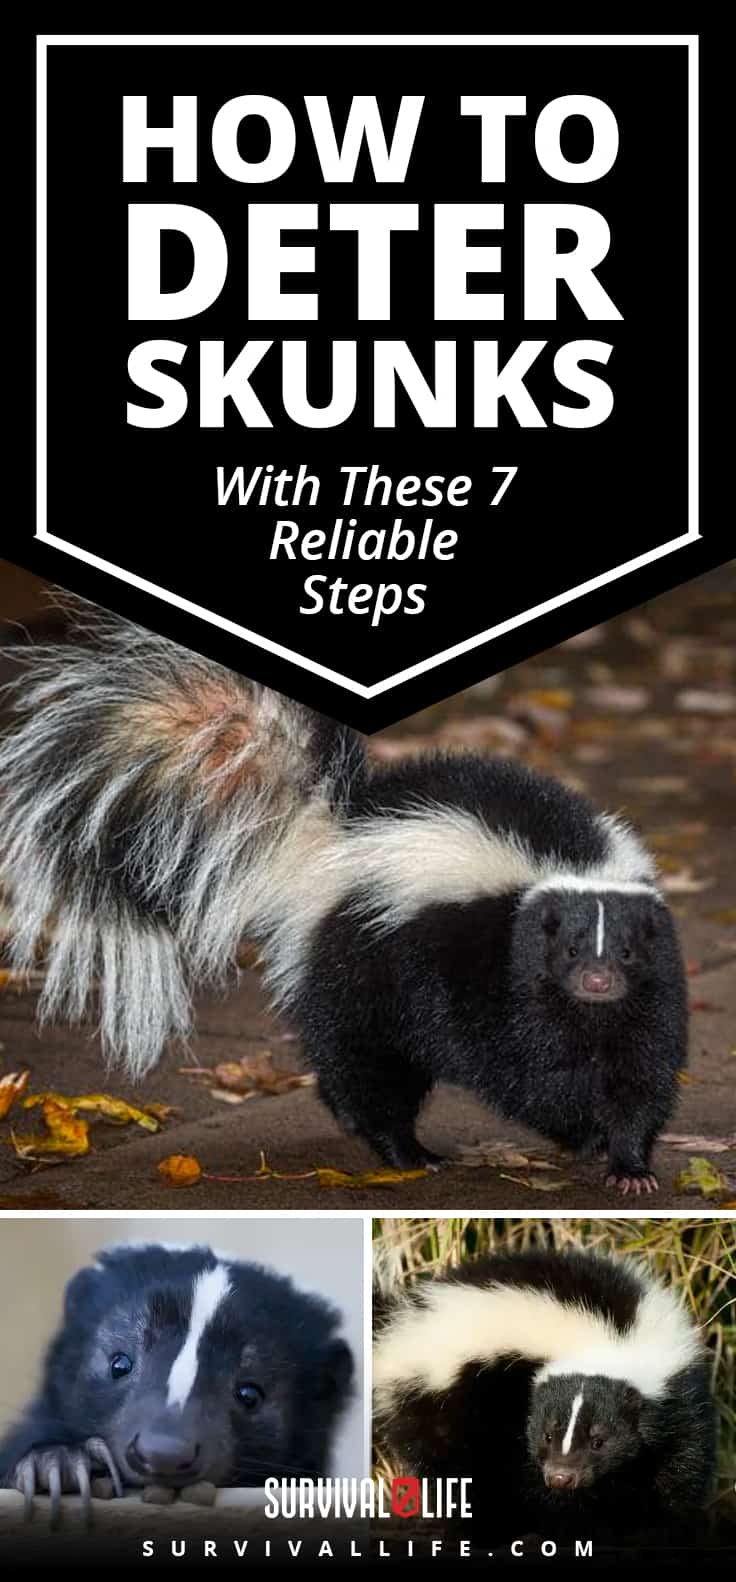 How To Deter Skunks With These 7 Reliable Steps | https://survivallife.com/deter-skunks/ ‎